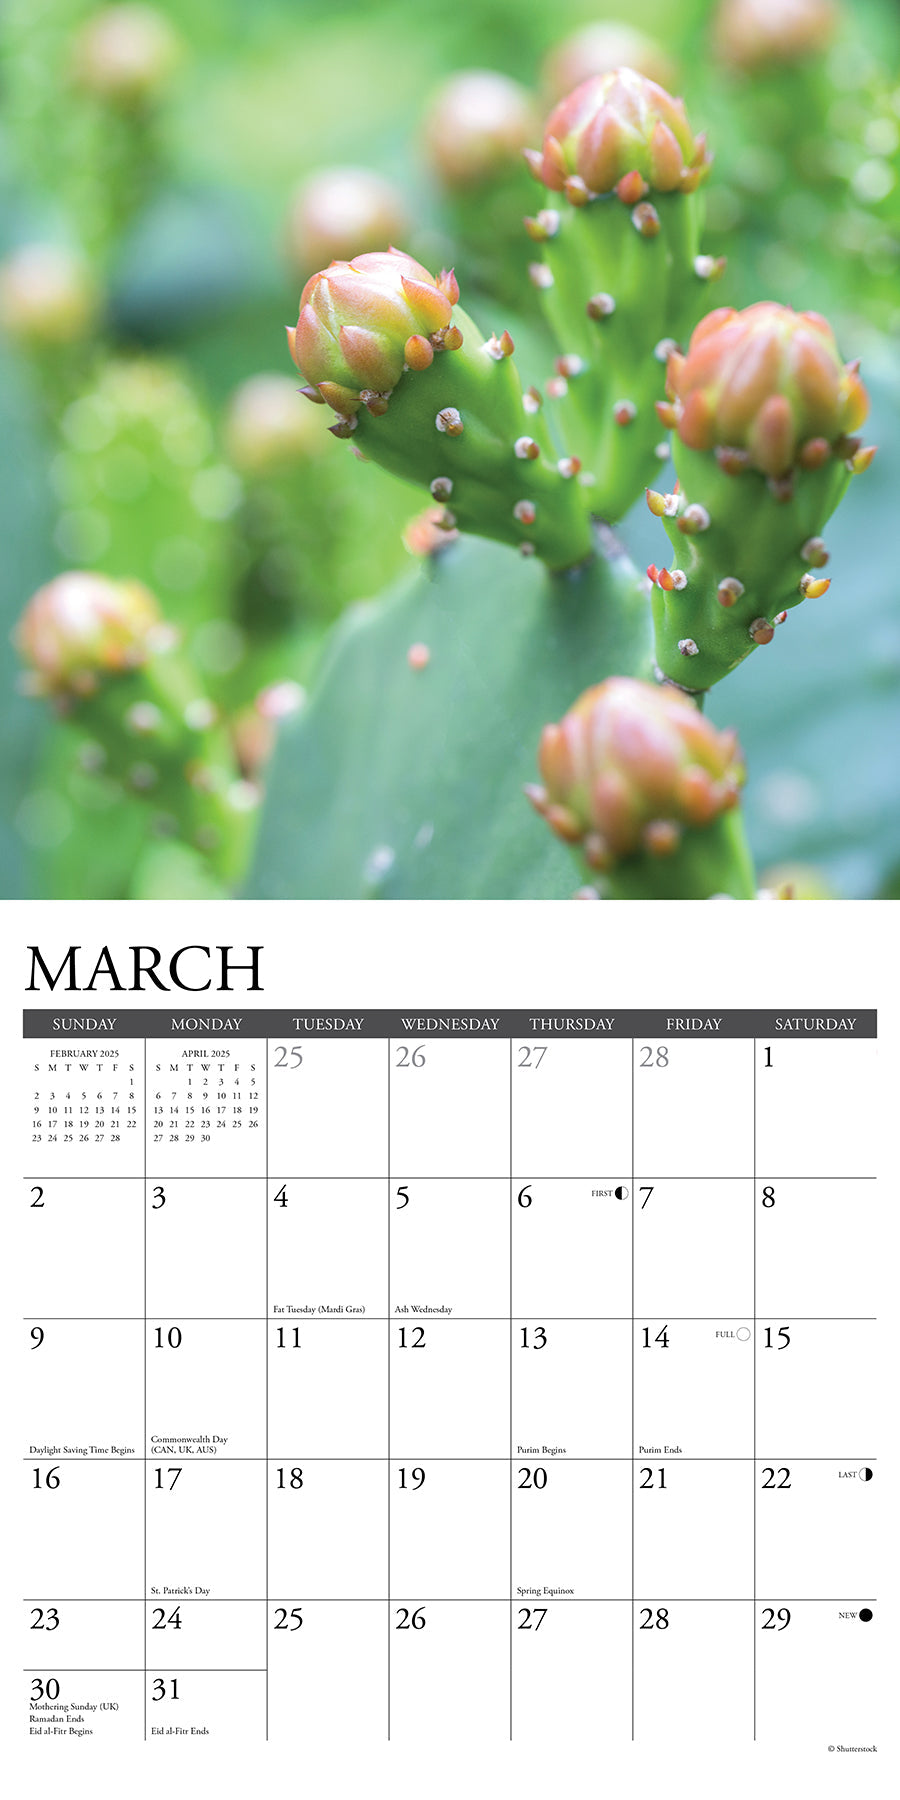 2025 Cactus - Square Wall Calendar (US Only)